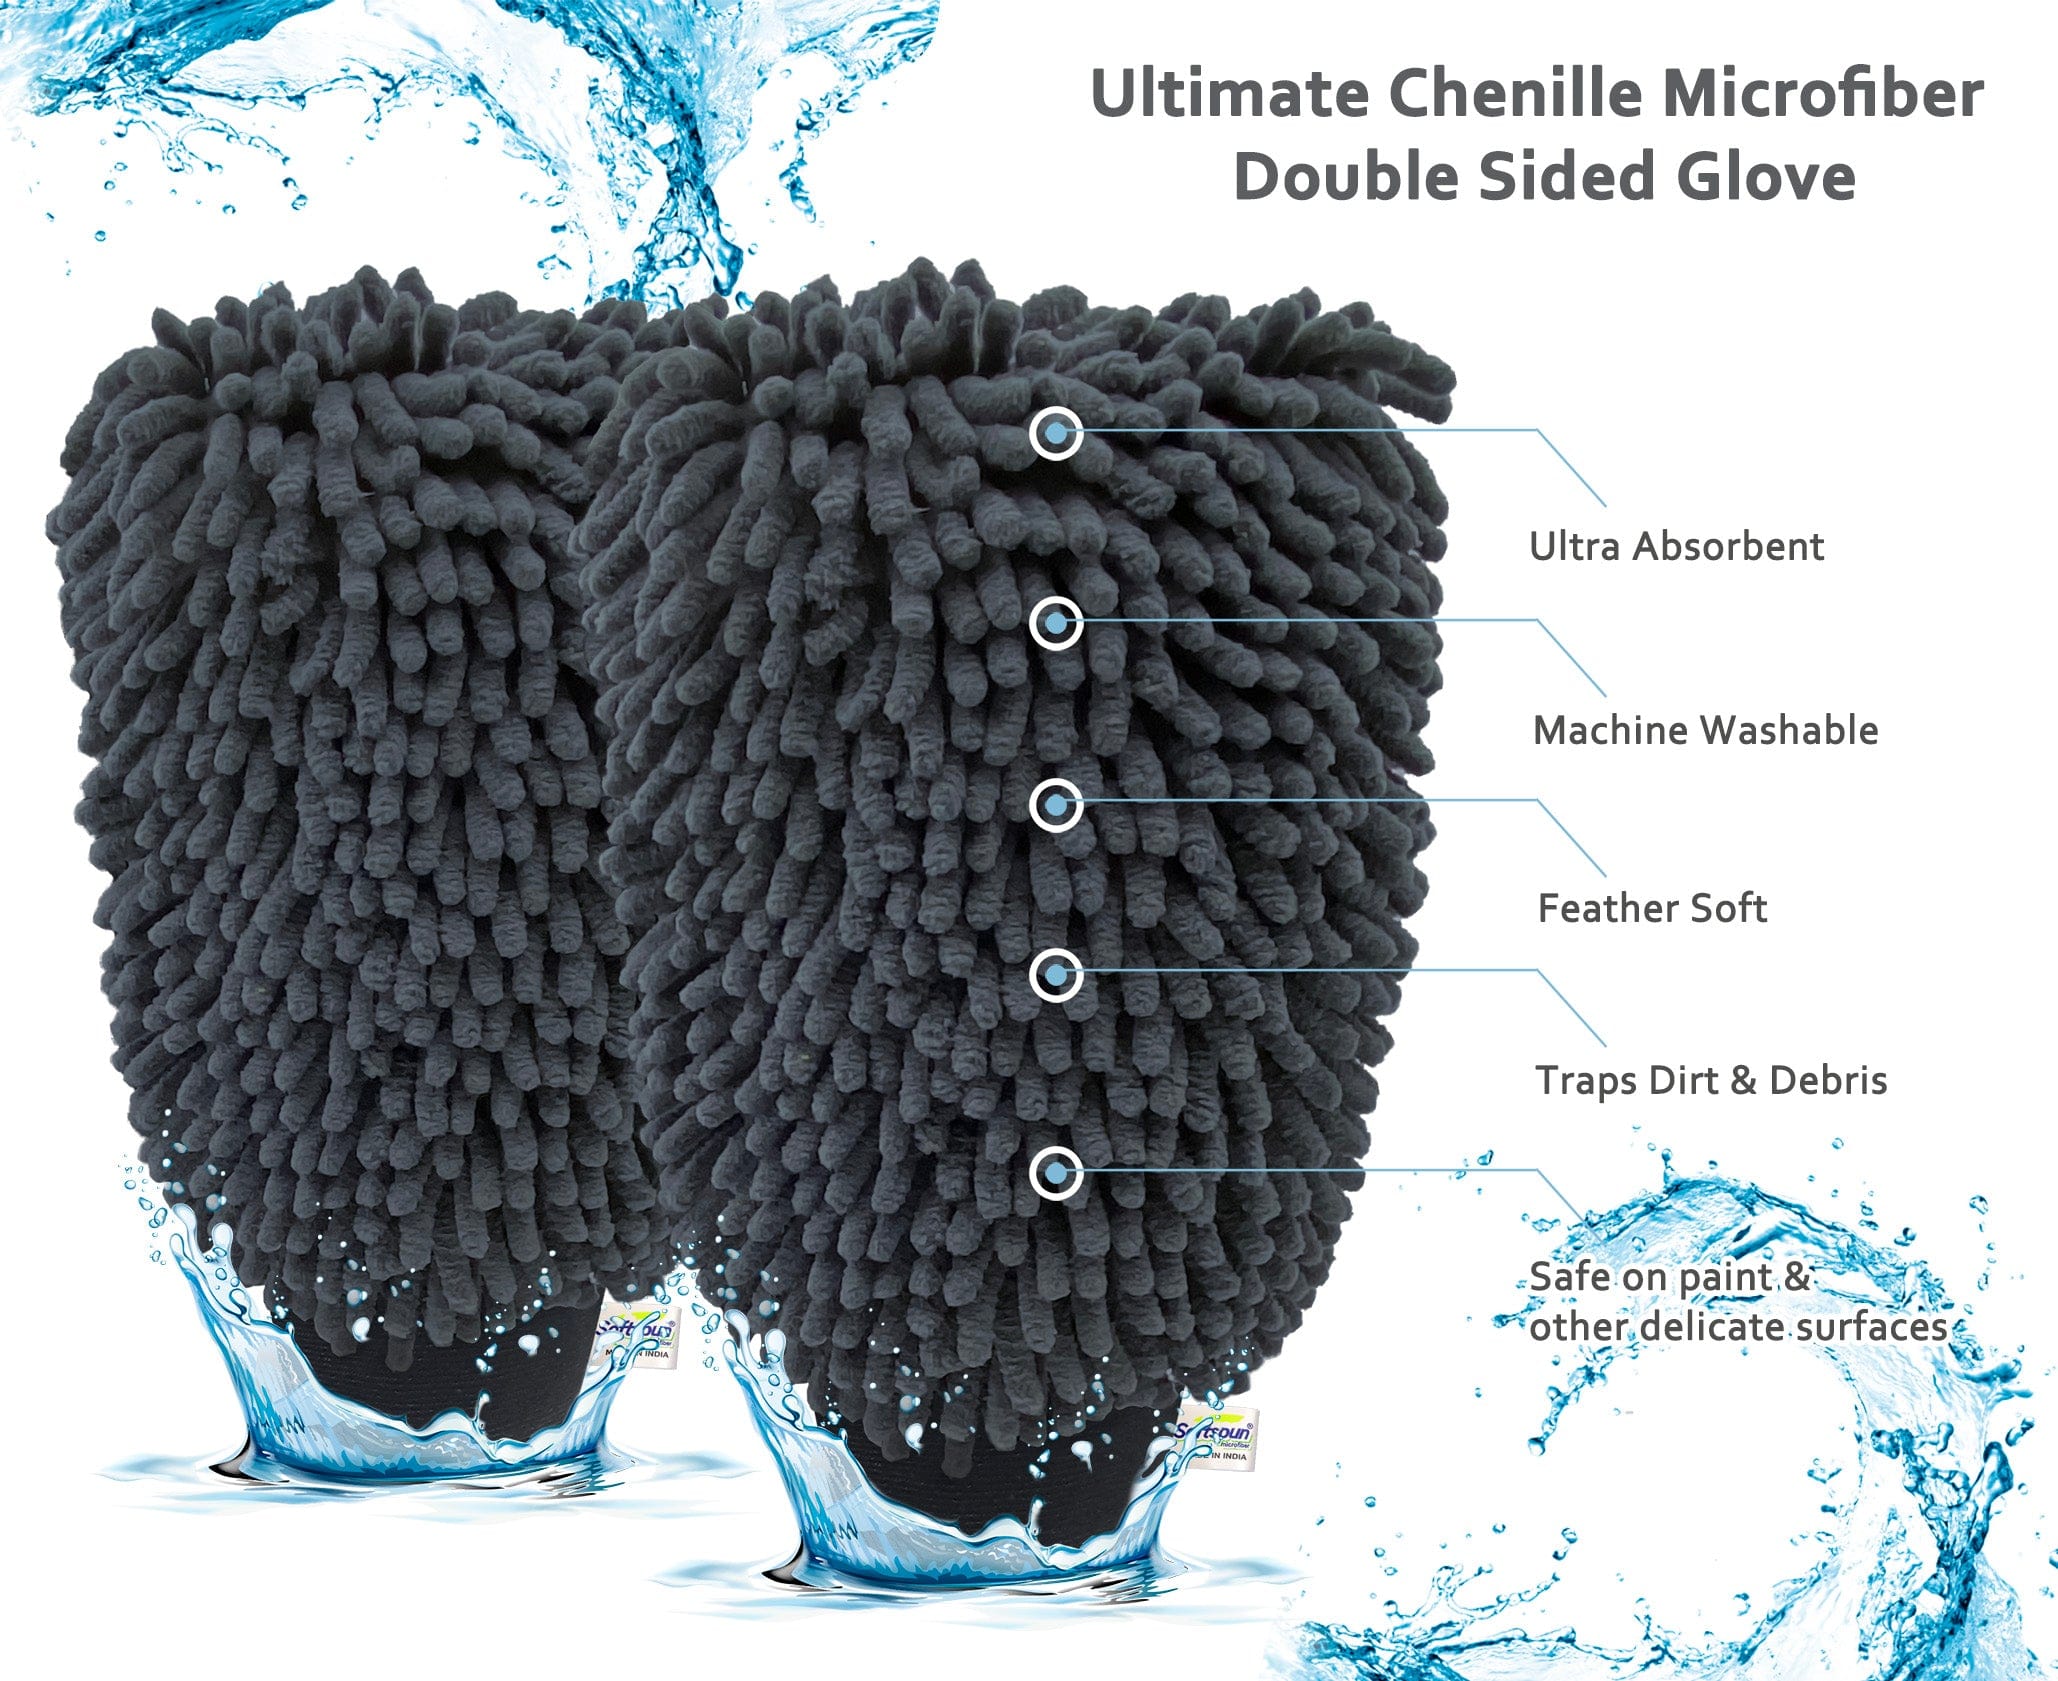 SOFTSPUN Microfiber Chenille & Glass Cloth Mitt,1700 GSM , Multi-Purpose Super Absorbent and Perfect Wash Clean with Lint-Scratch Free Cars, Window, Kitchen, Home Dusting!.